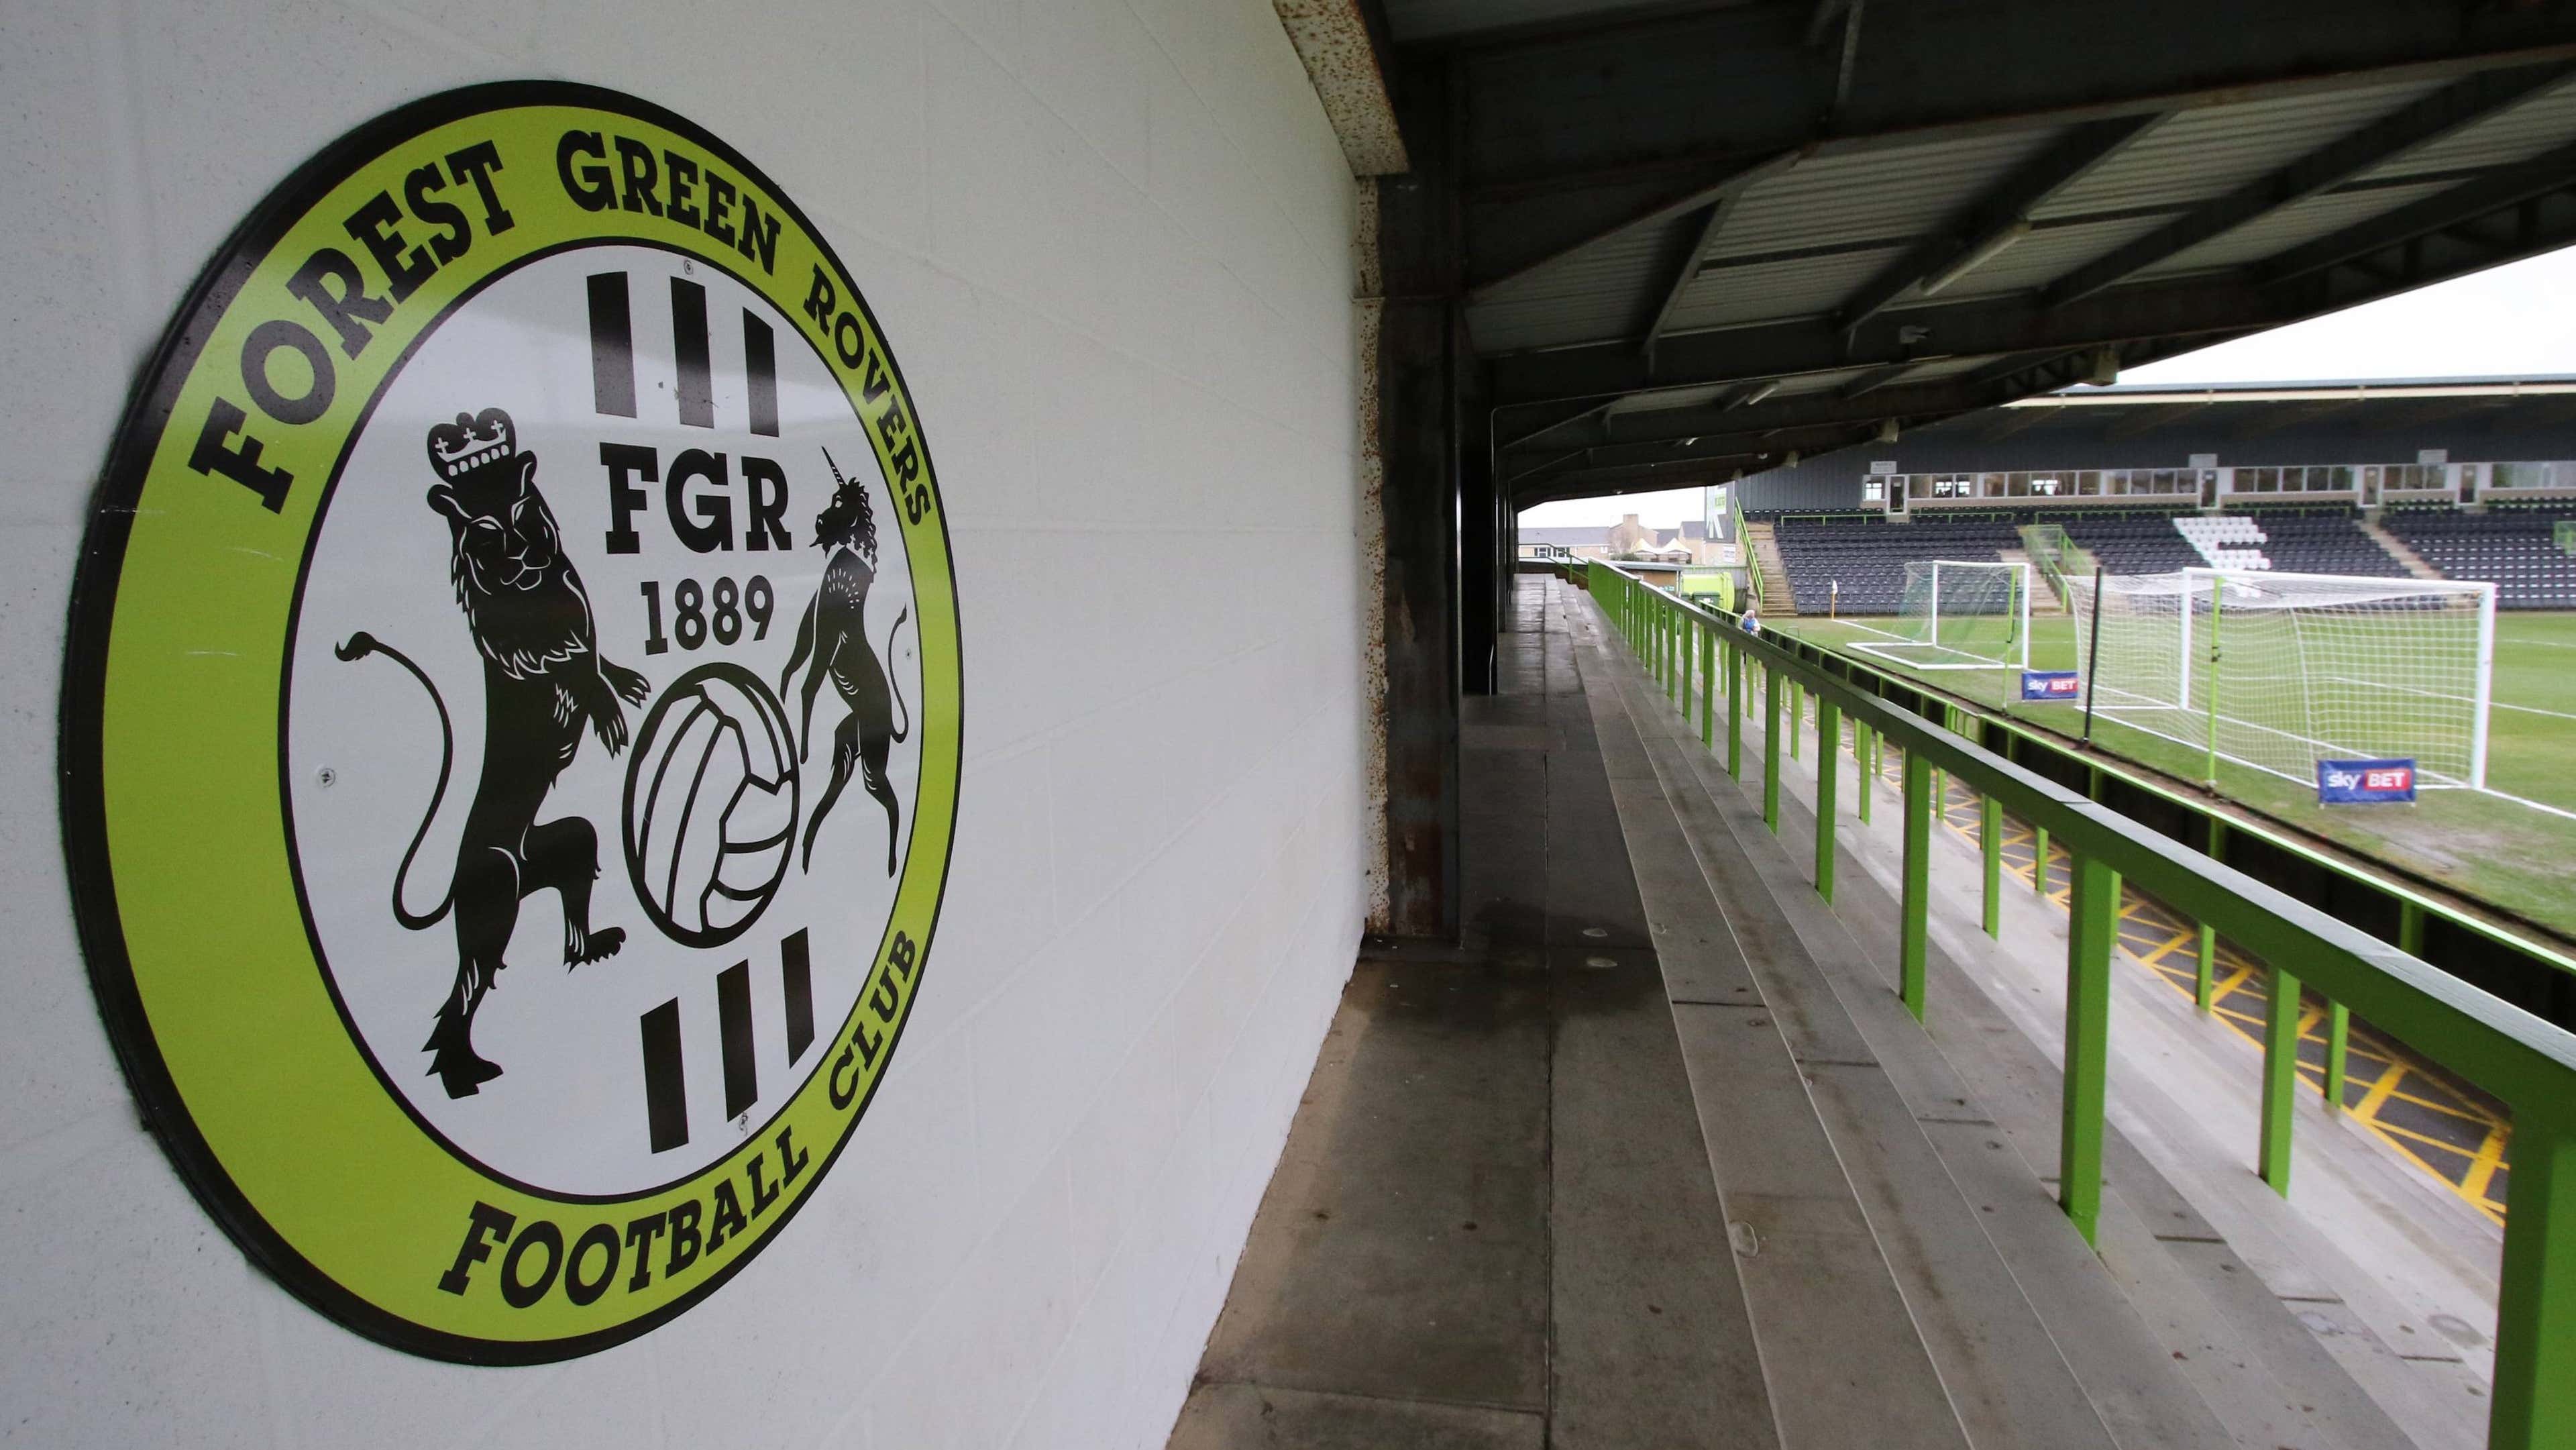 GERMANY ONLY Forest Green Rovers The New Lawn Stadium